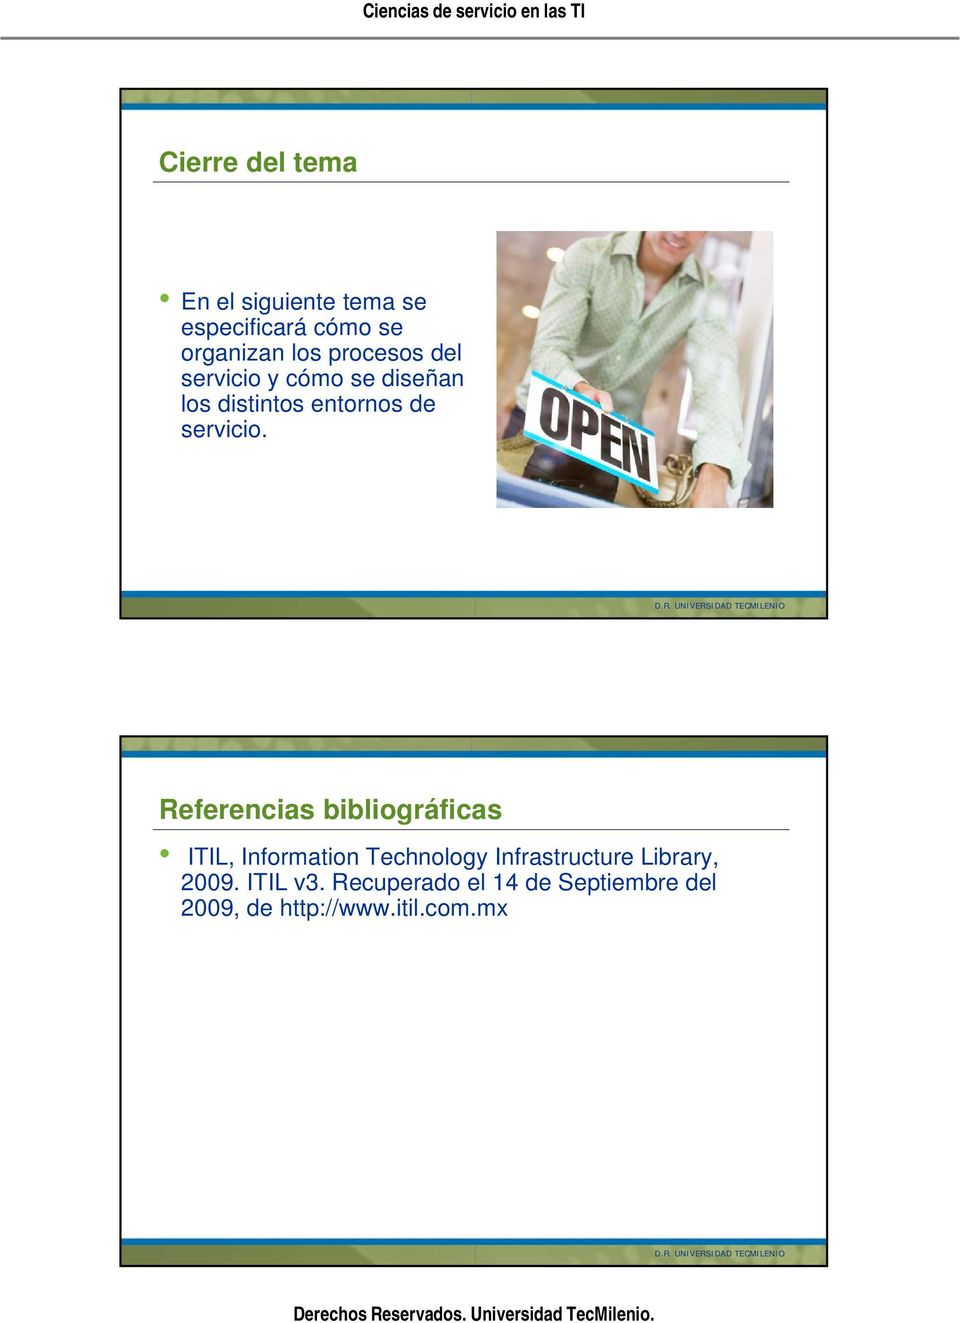 Referencias bibliográficas ITIL, Information Technology Infrastructure